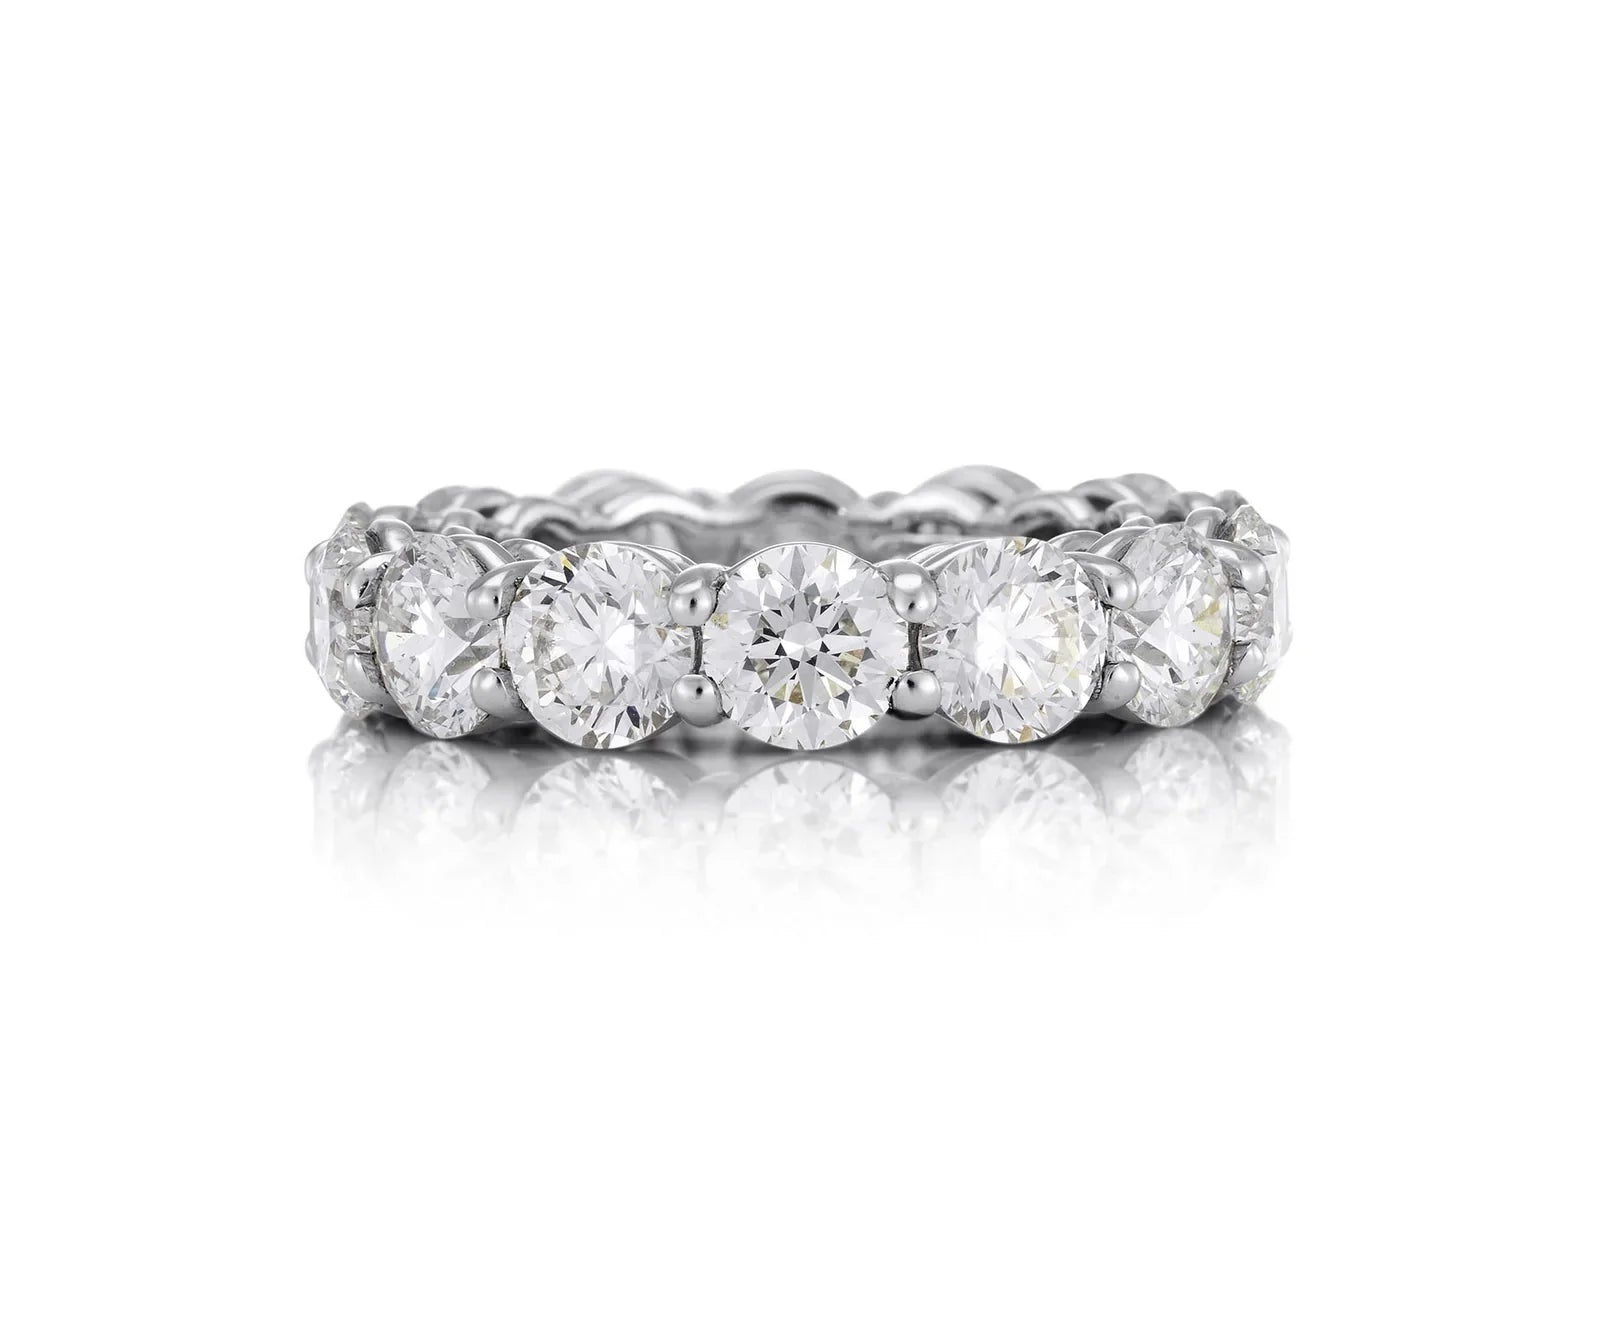 Statement Cubic Zirconia Eternity Band Ring | Sterling Silver - Camillaboutiqueco camillaboutiqueshop.com